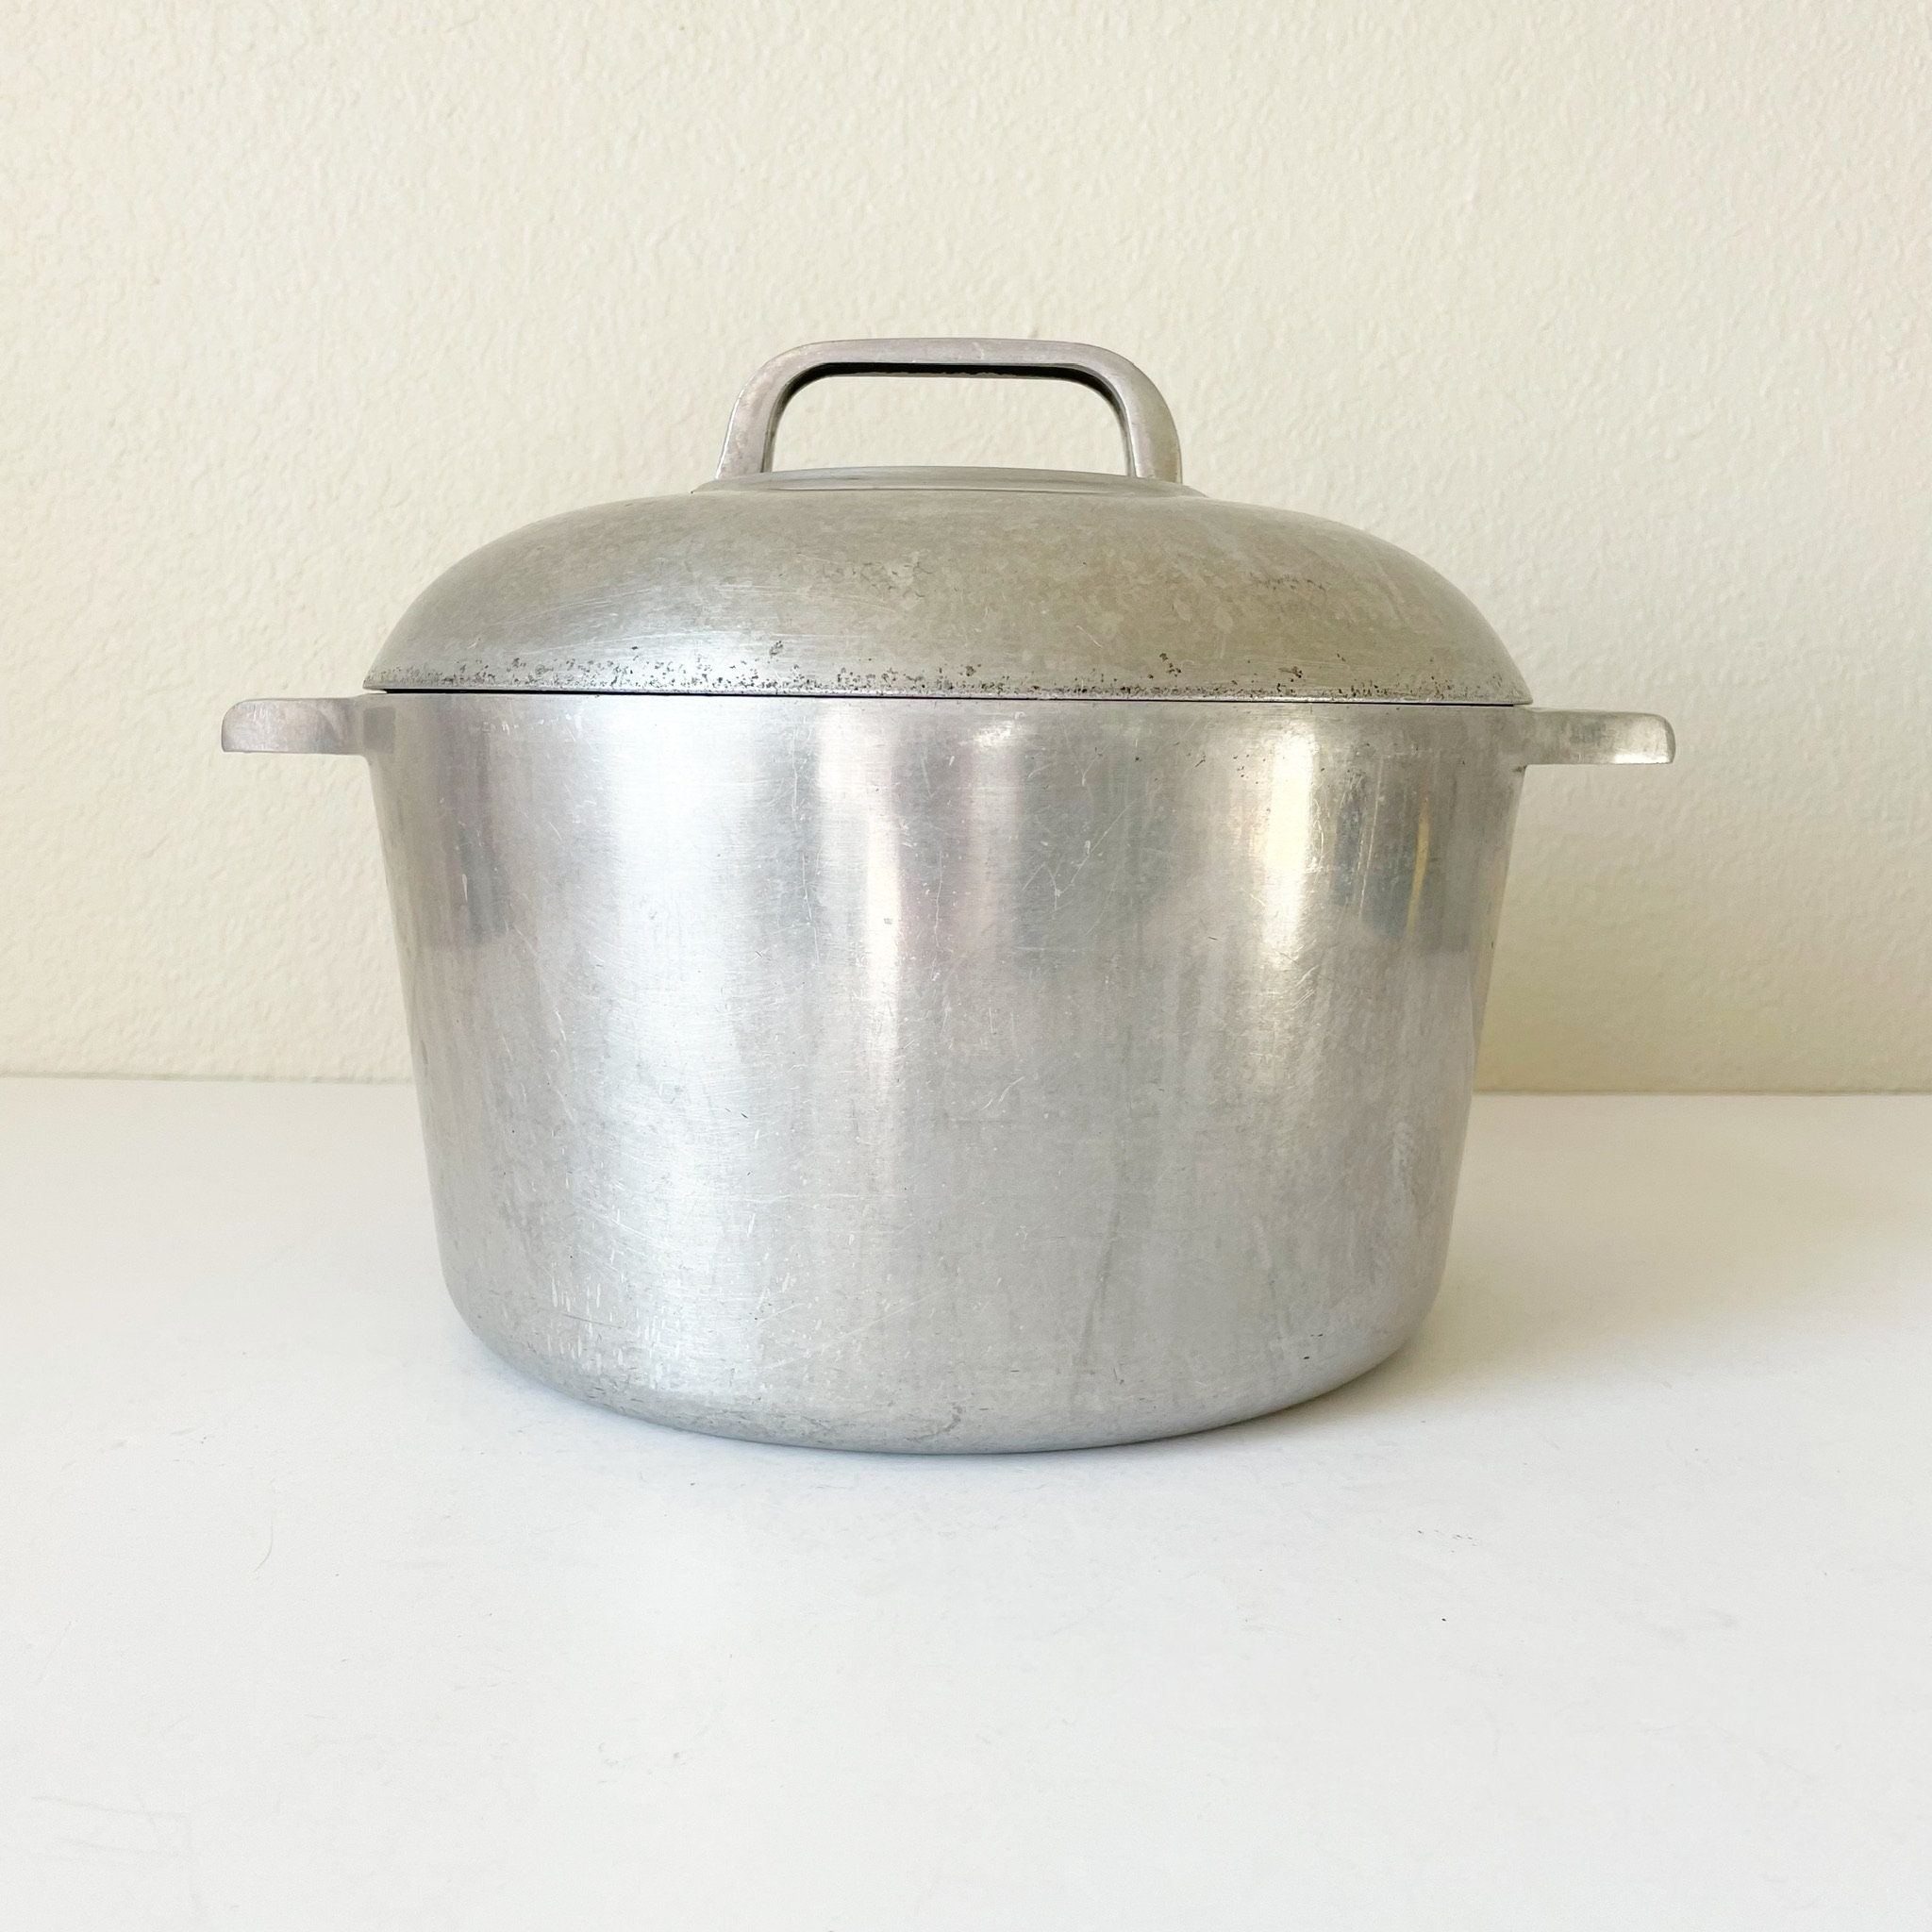 Lot 16 - Magnalite Cookware - Large Set - Sac Valley Auctions